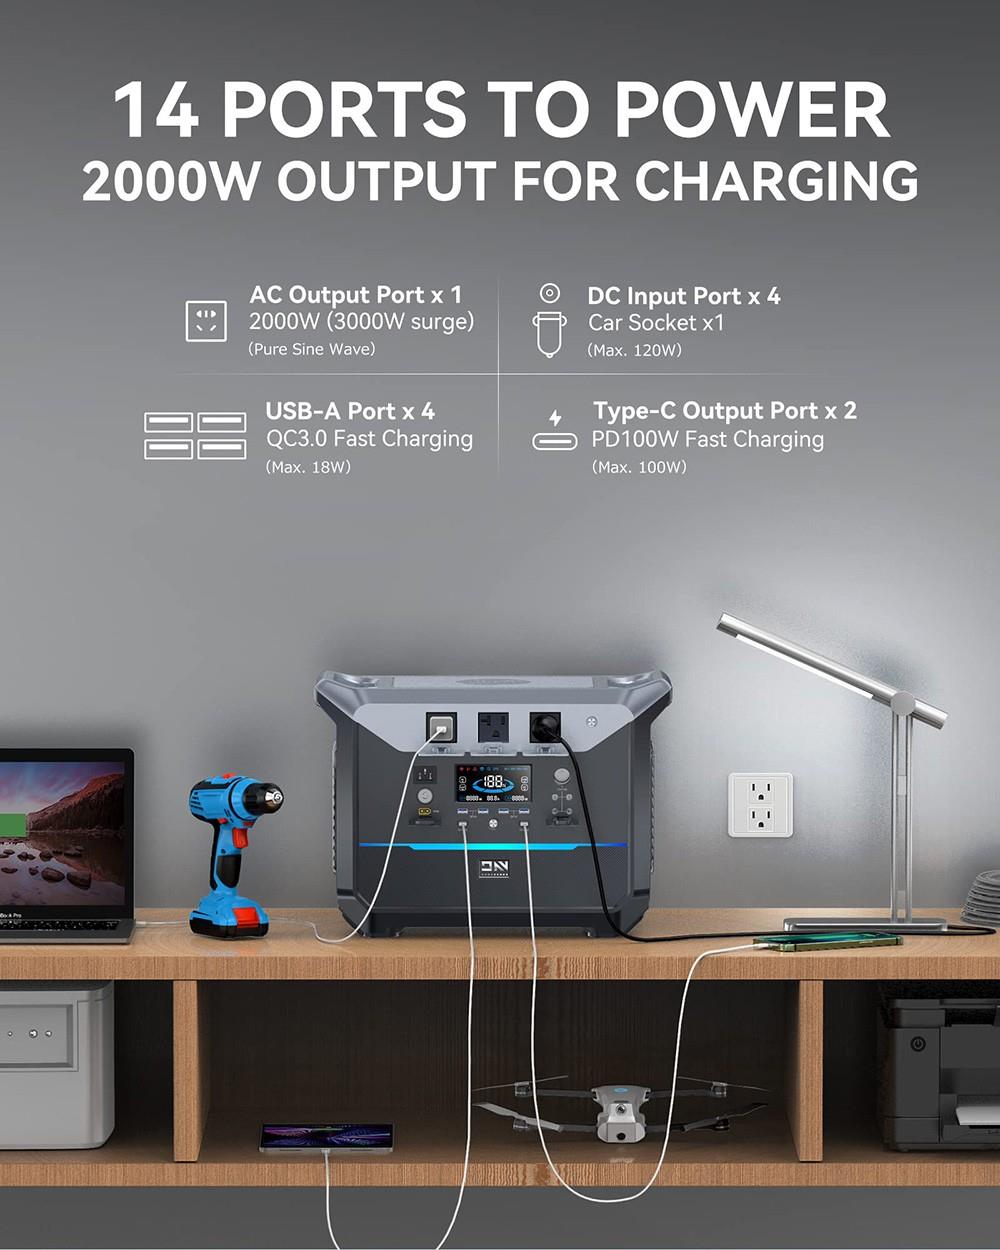 DaranEner NEO2000 Portable Power Station, 2073.6Wh LiFePO4 Battery Solar Generator, 2000W AC Output, 1.8H Full Charge